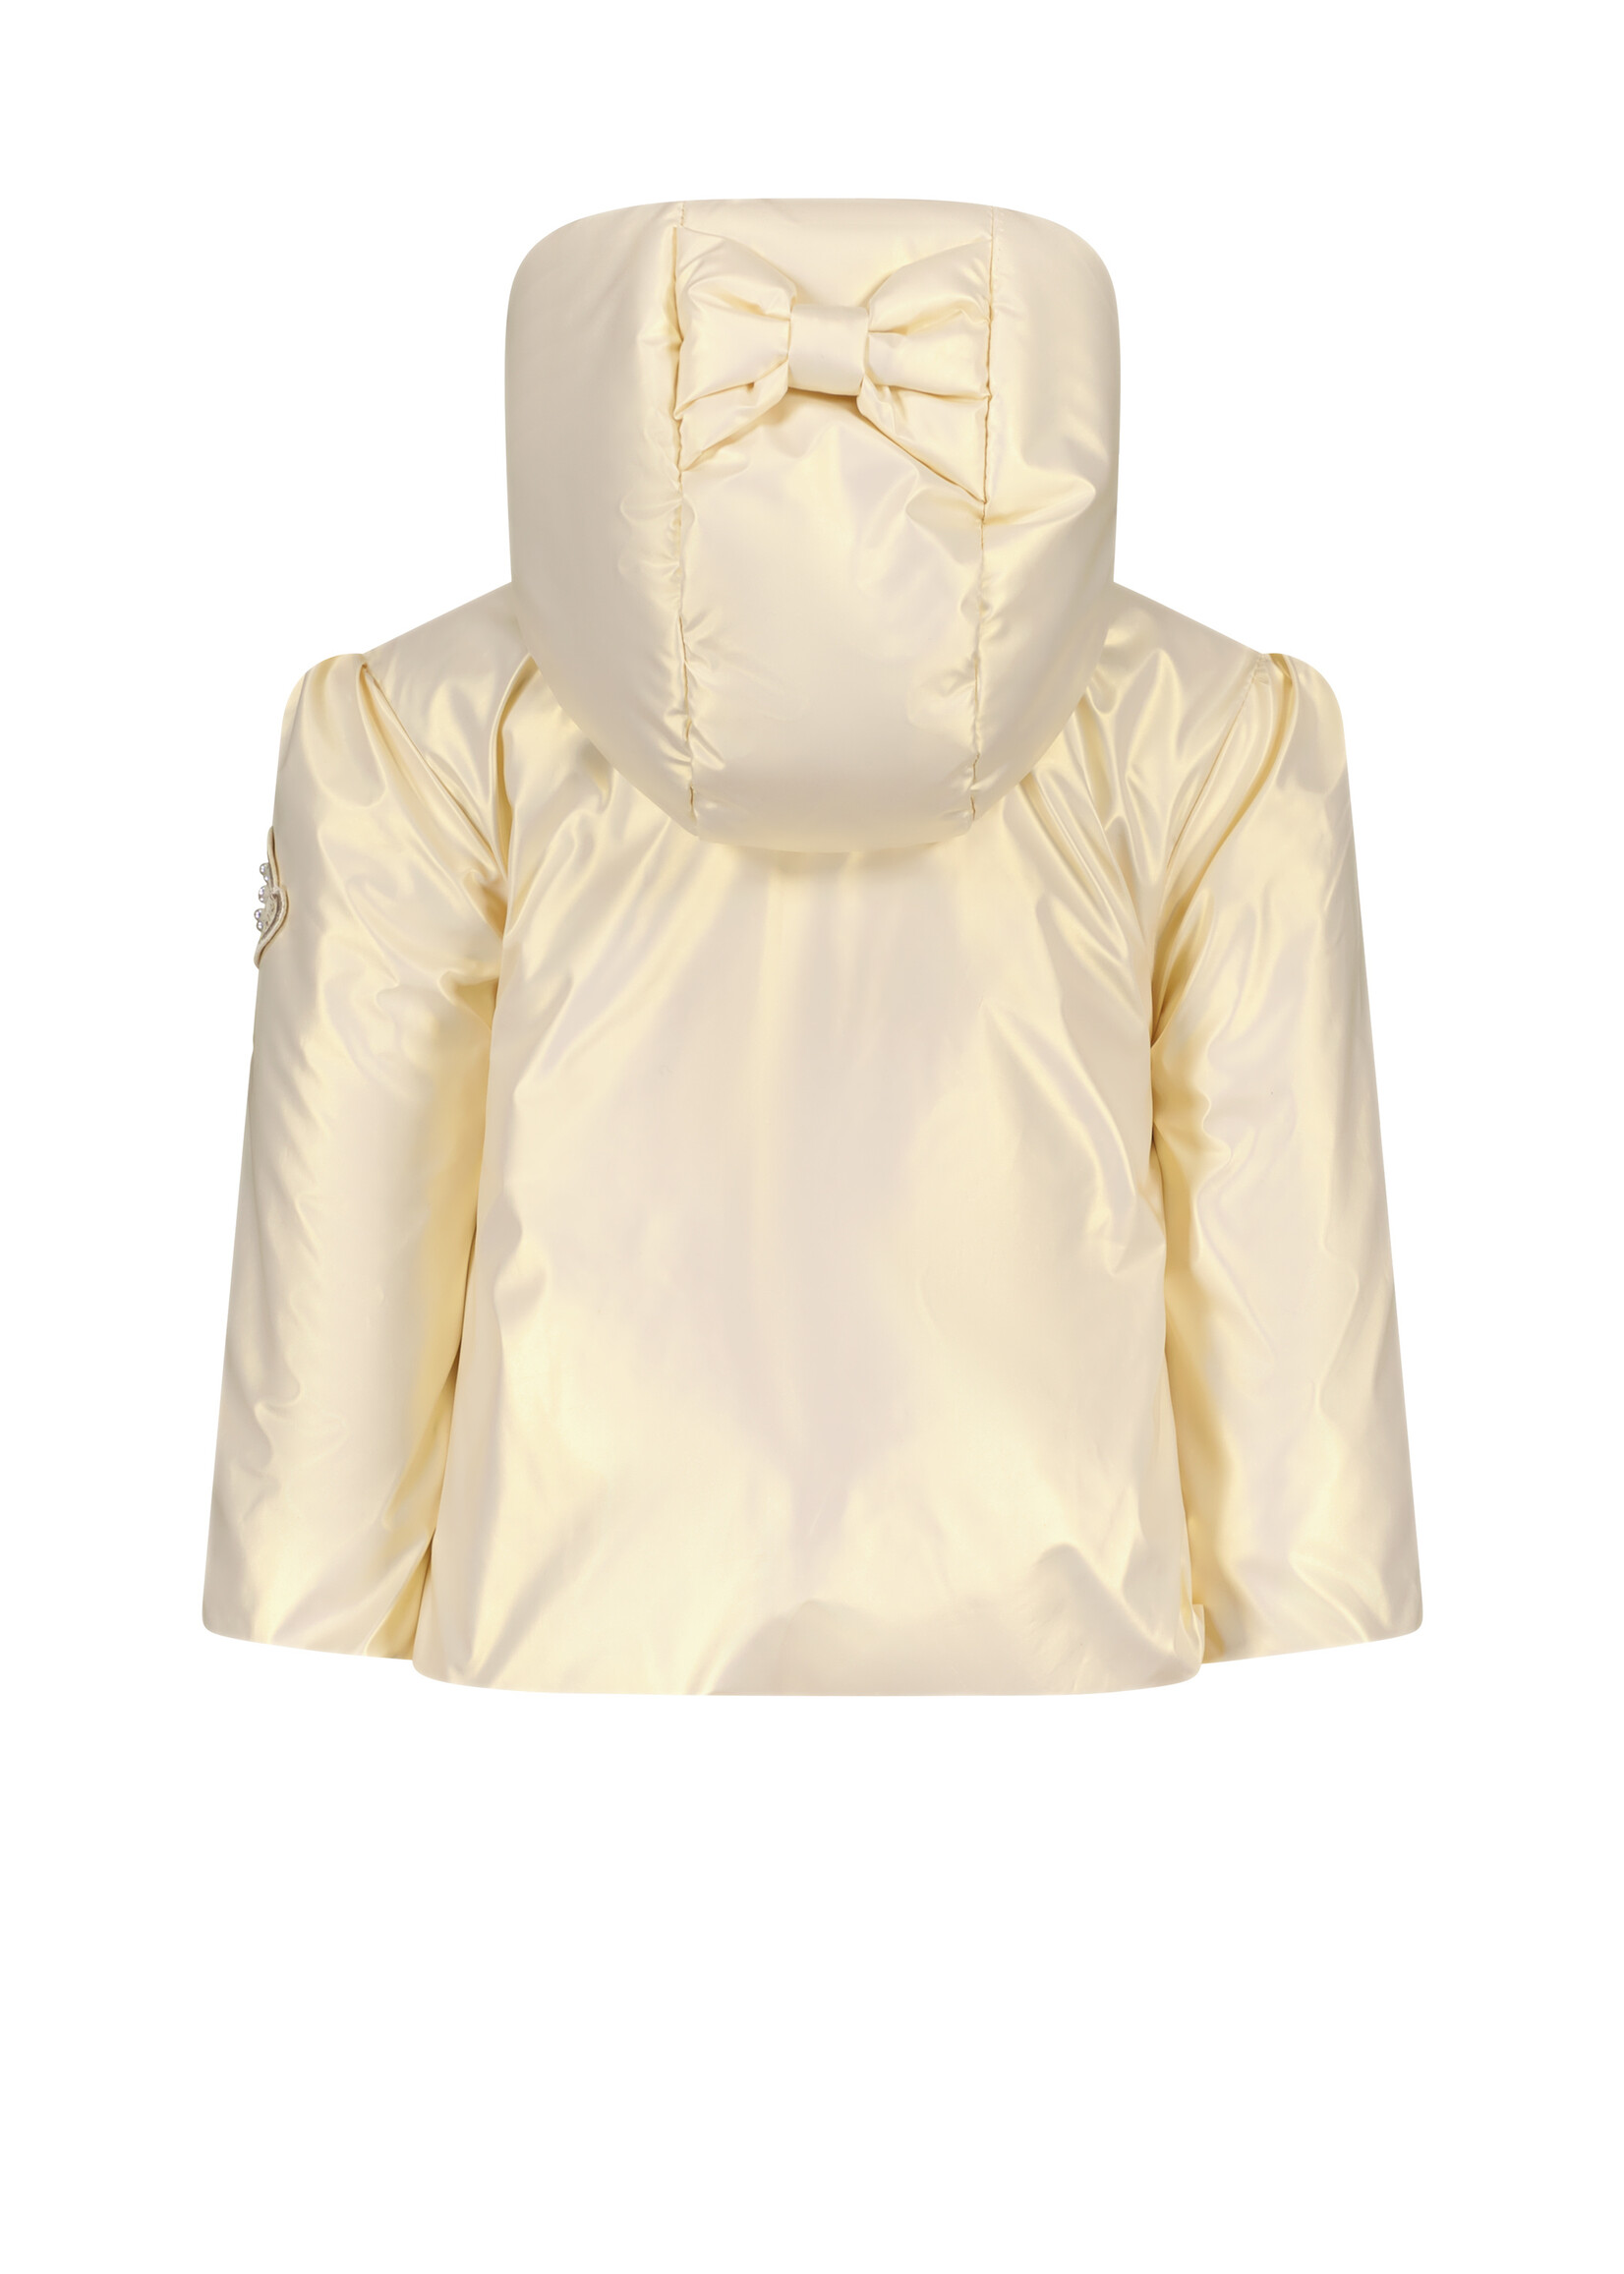 Le Chic Girls Baby C312-7200 BABSHY metal-look summer coat Pearled Ivory